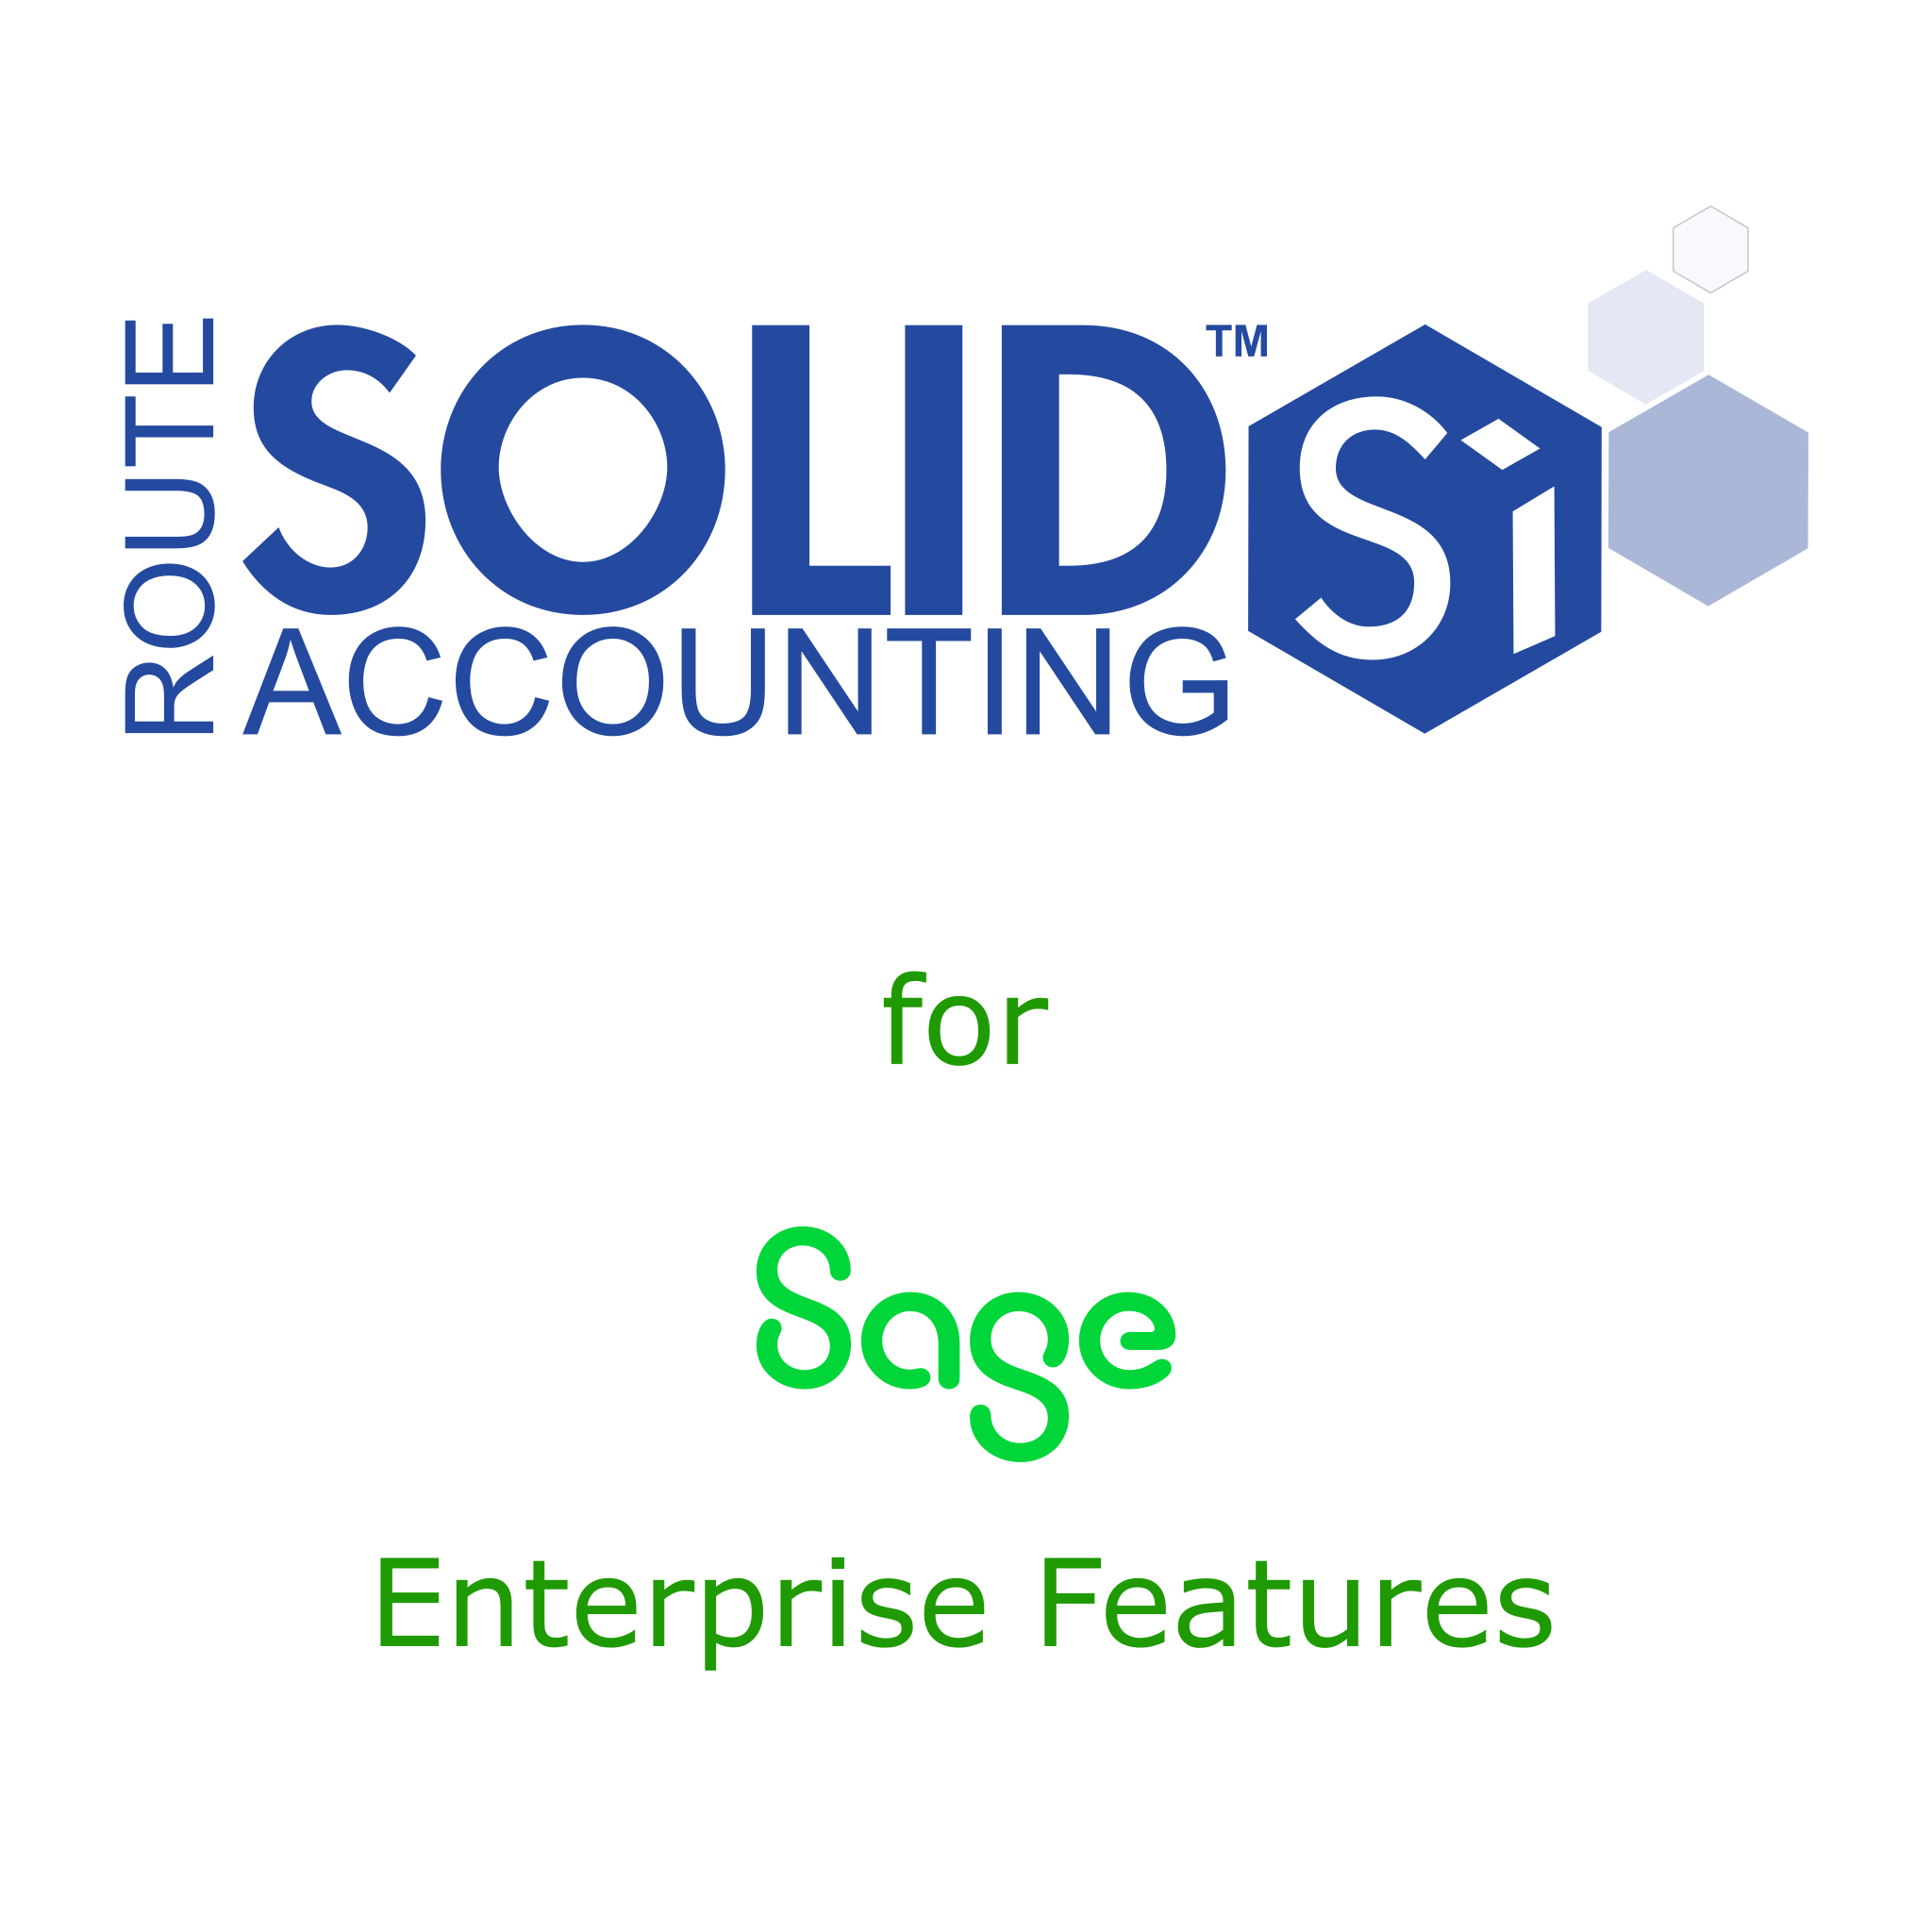 Route Accounting Software for Sage 100 with Enterprise Features